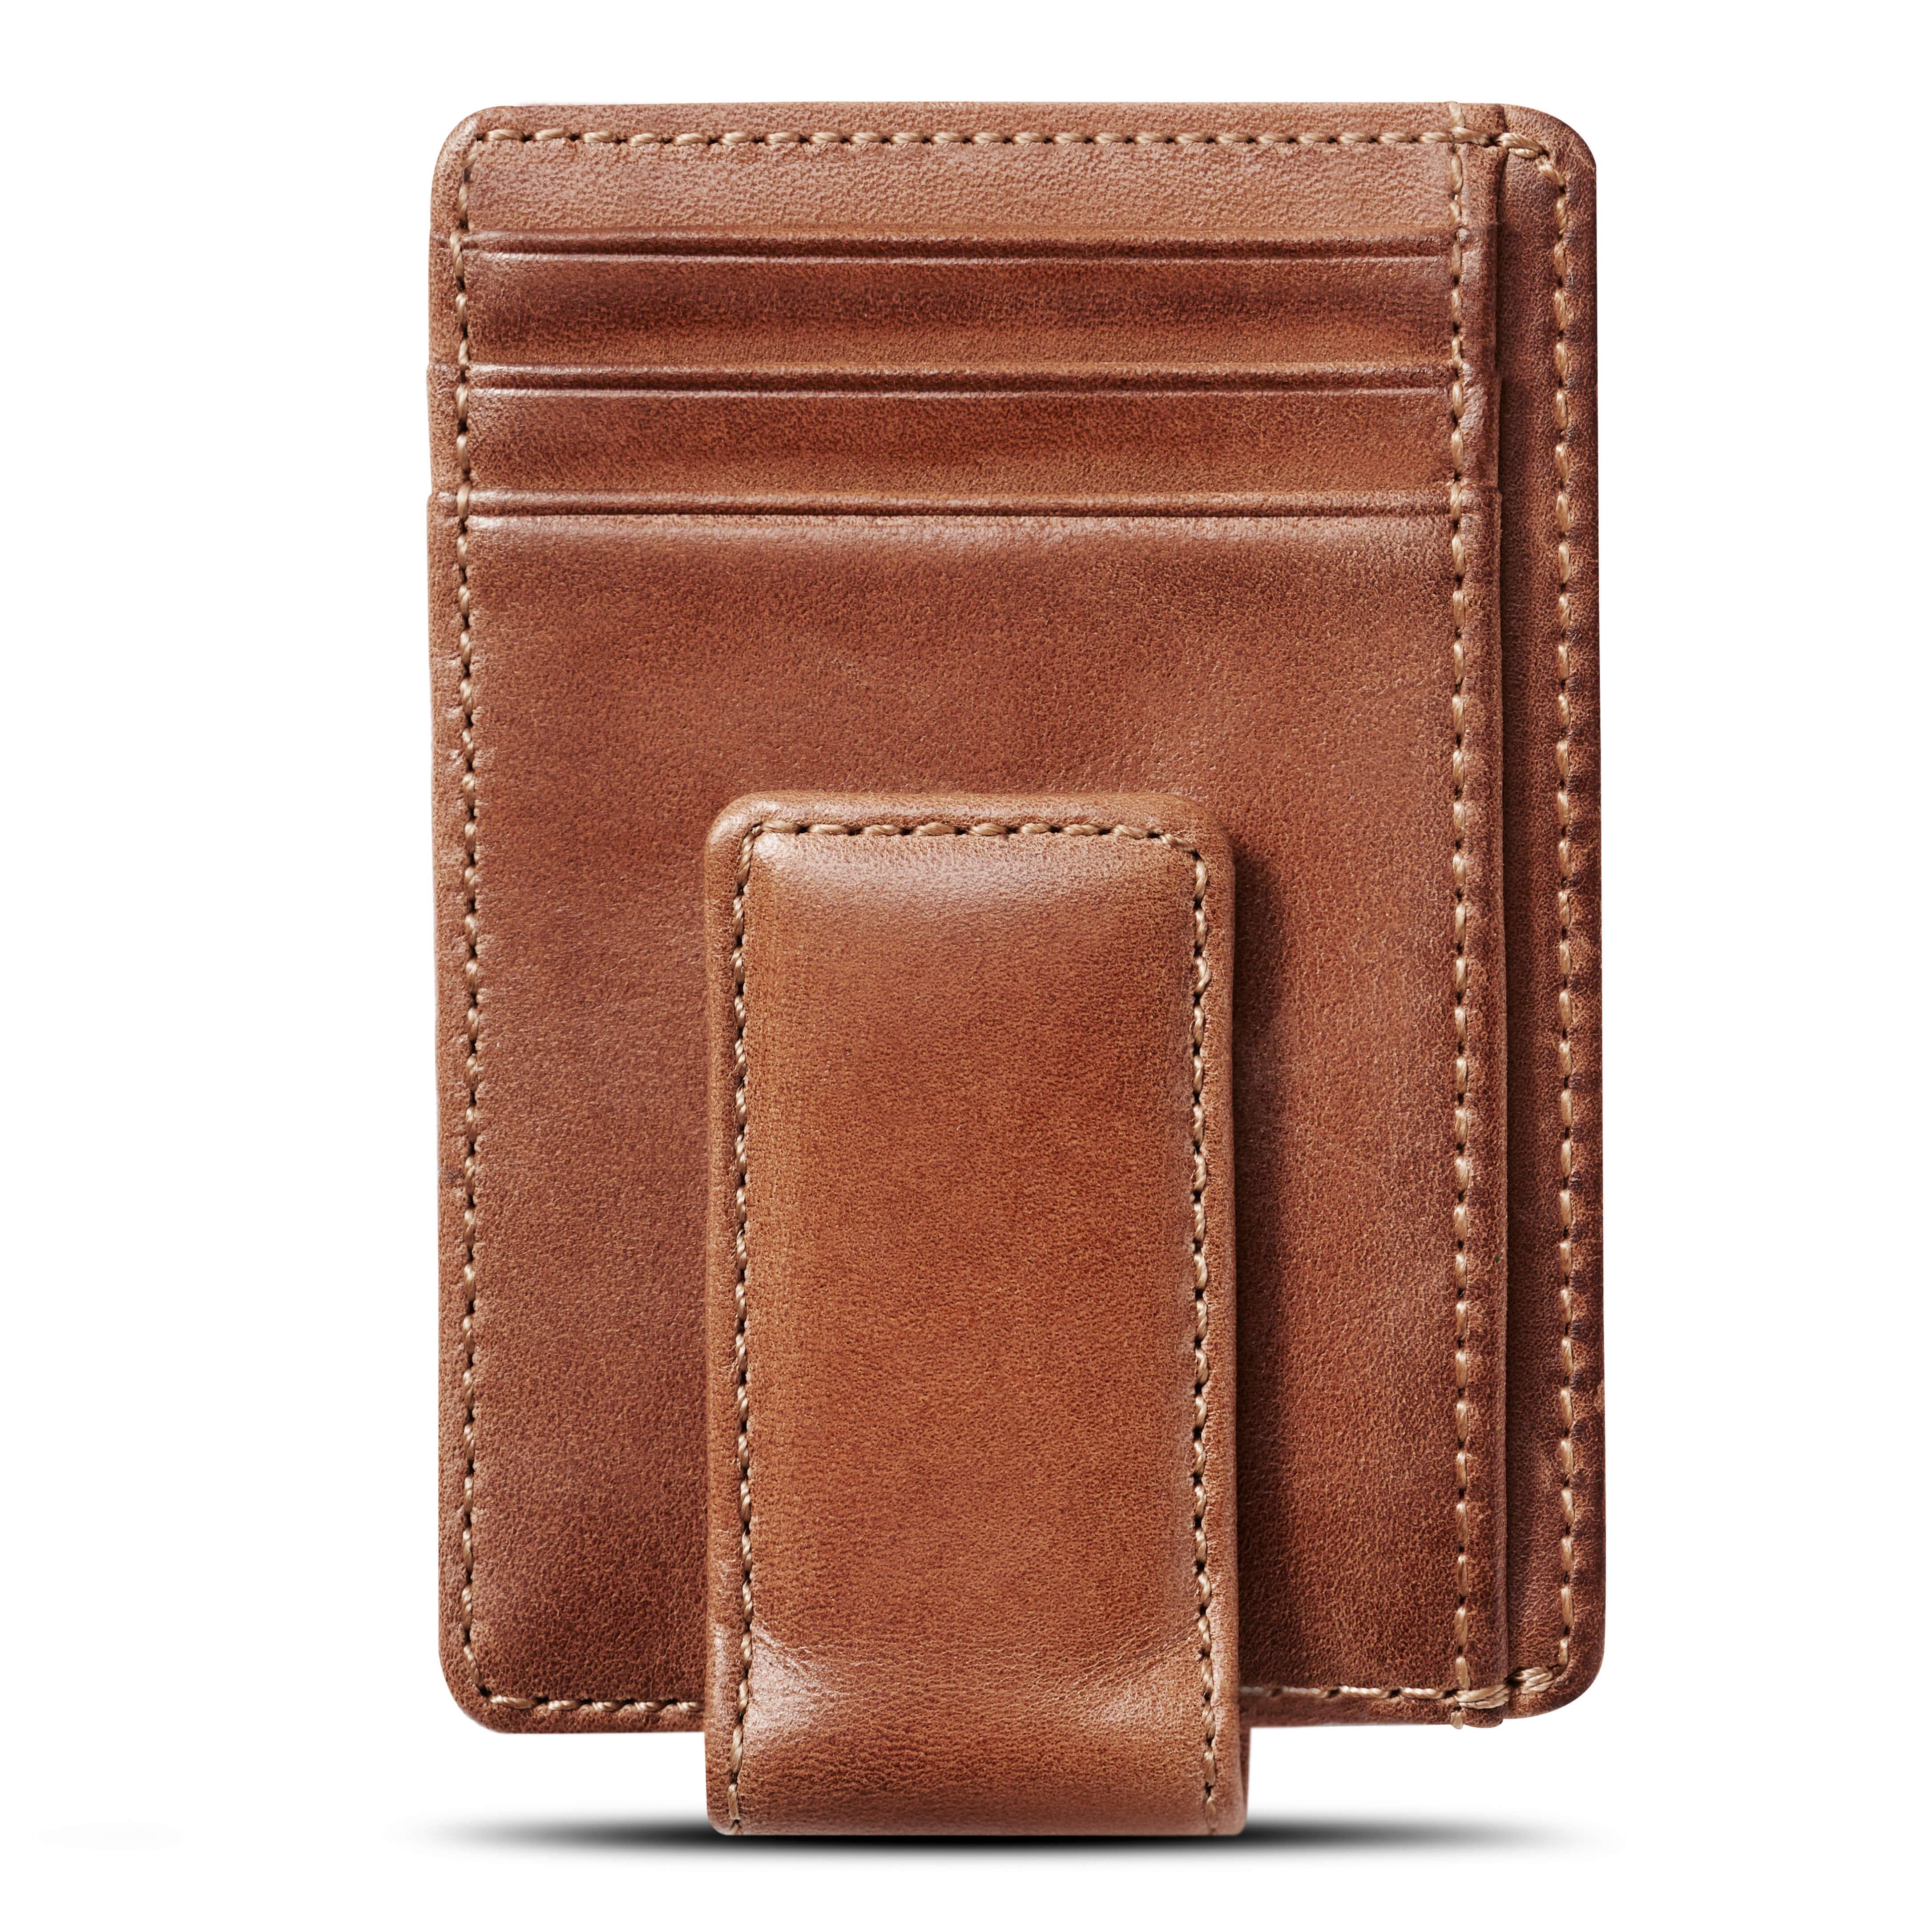 Magnetic Front Pocket Wallet - The Carryall